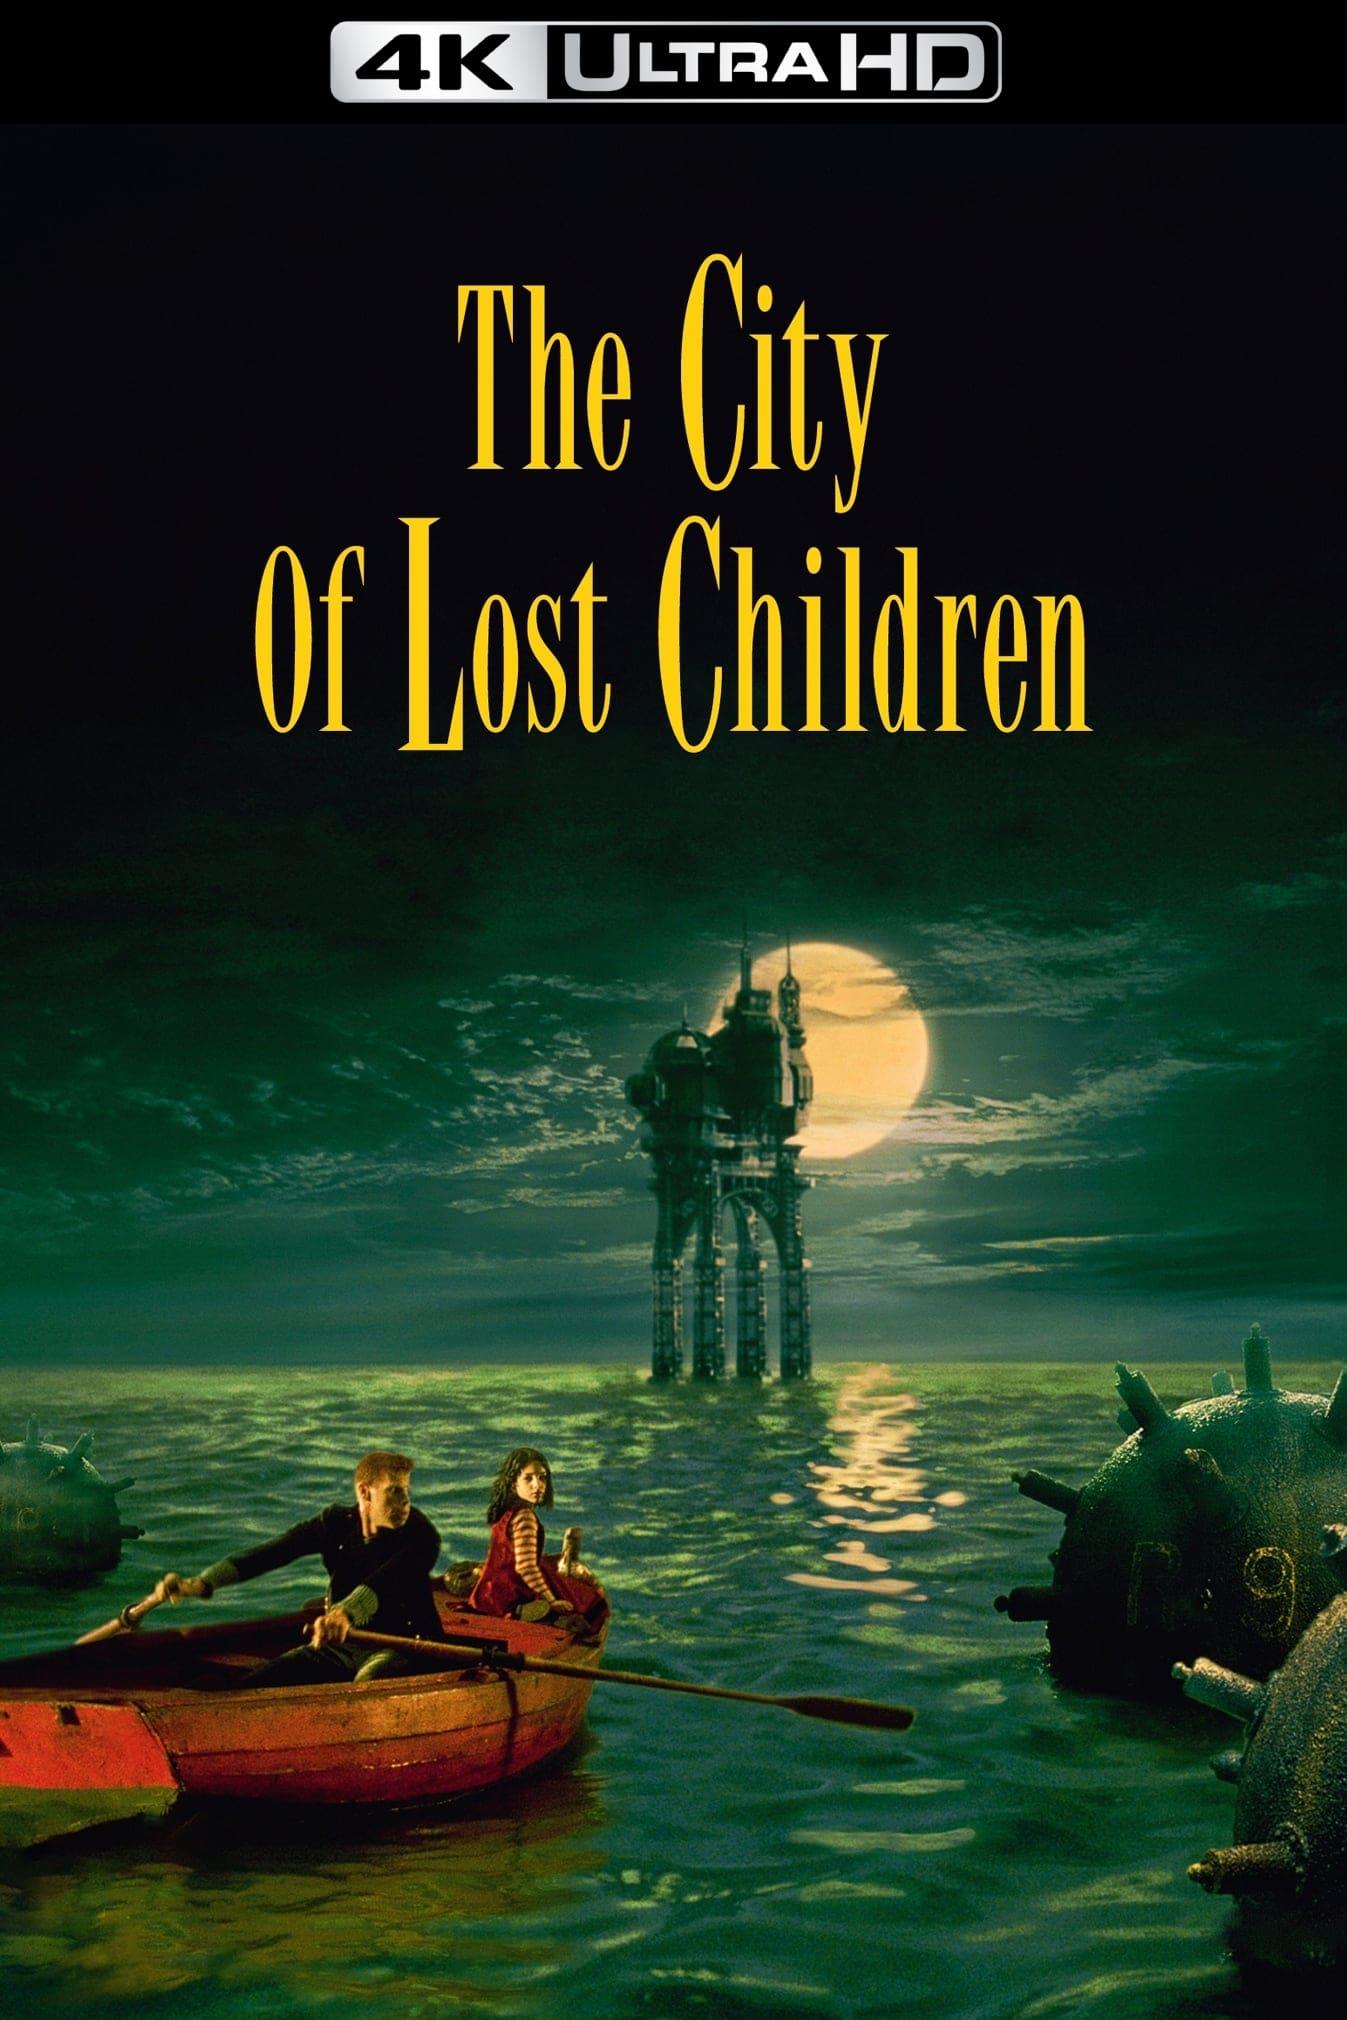 The City of Lost Children poster